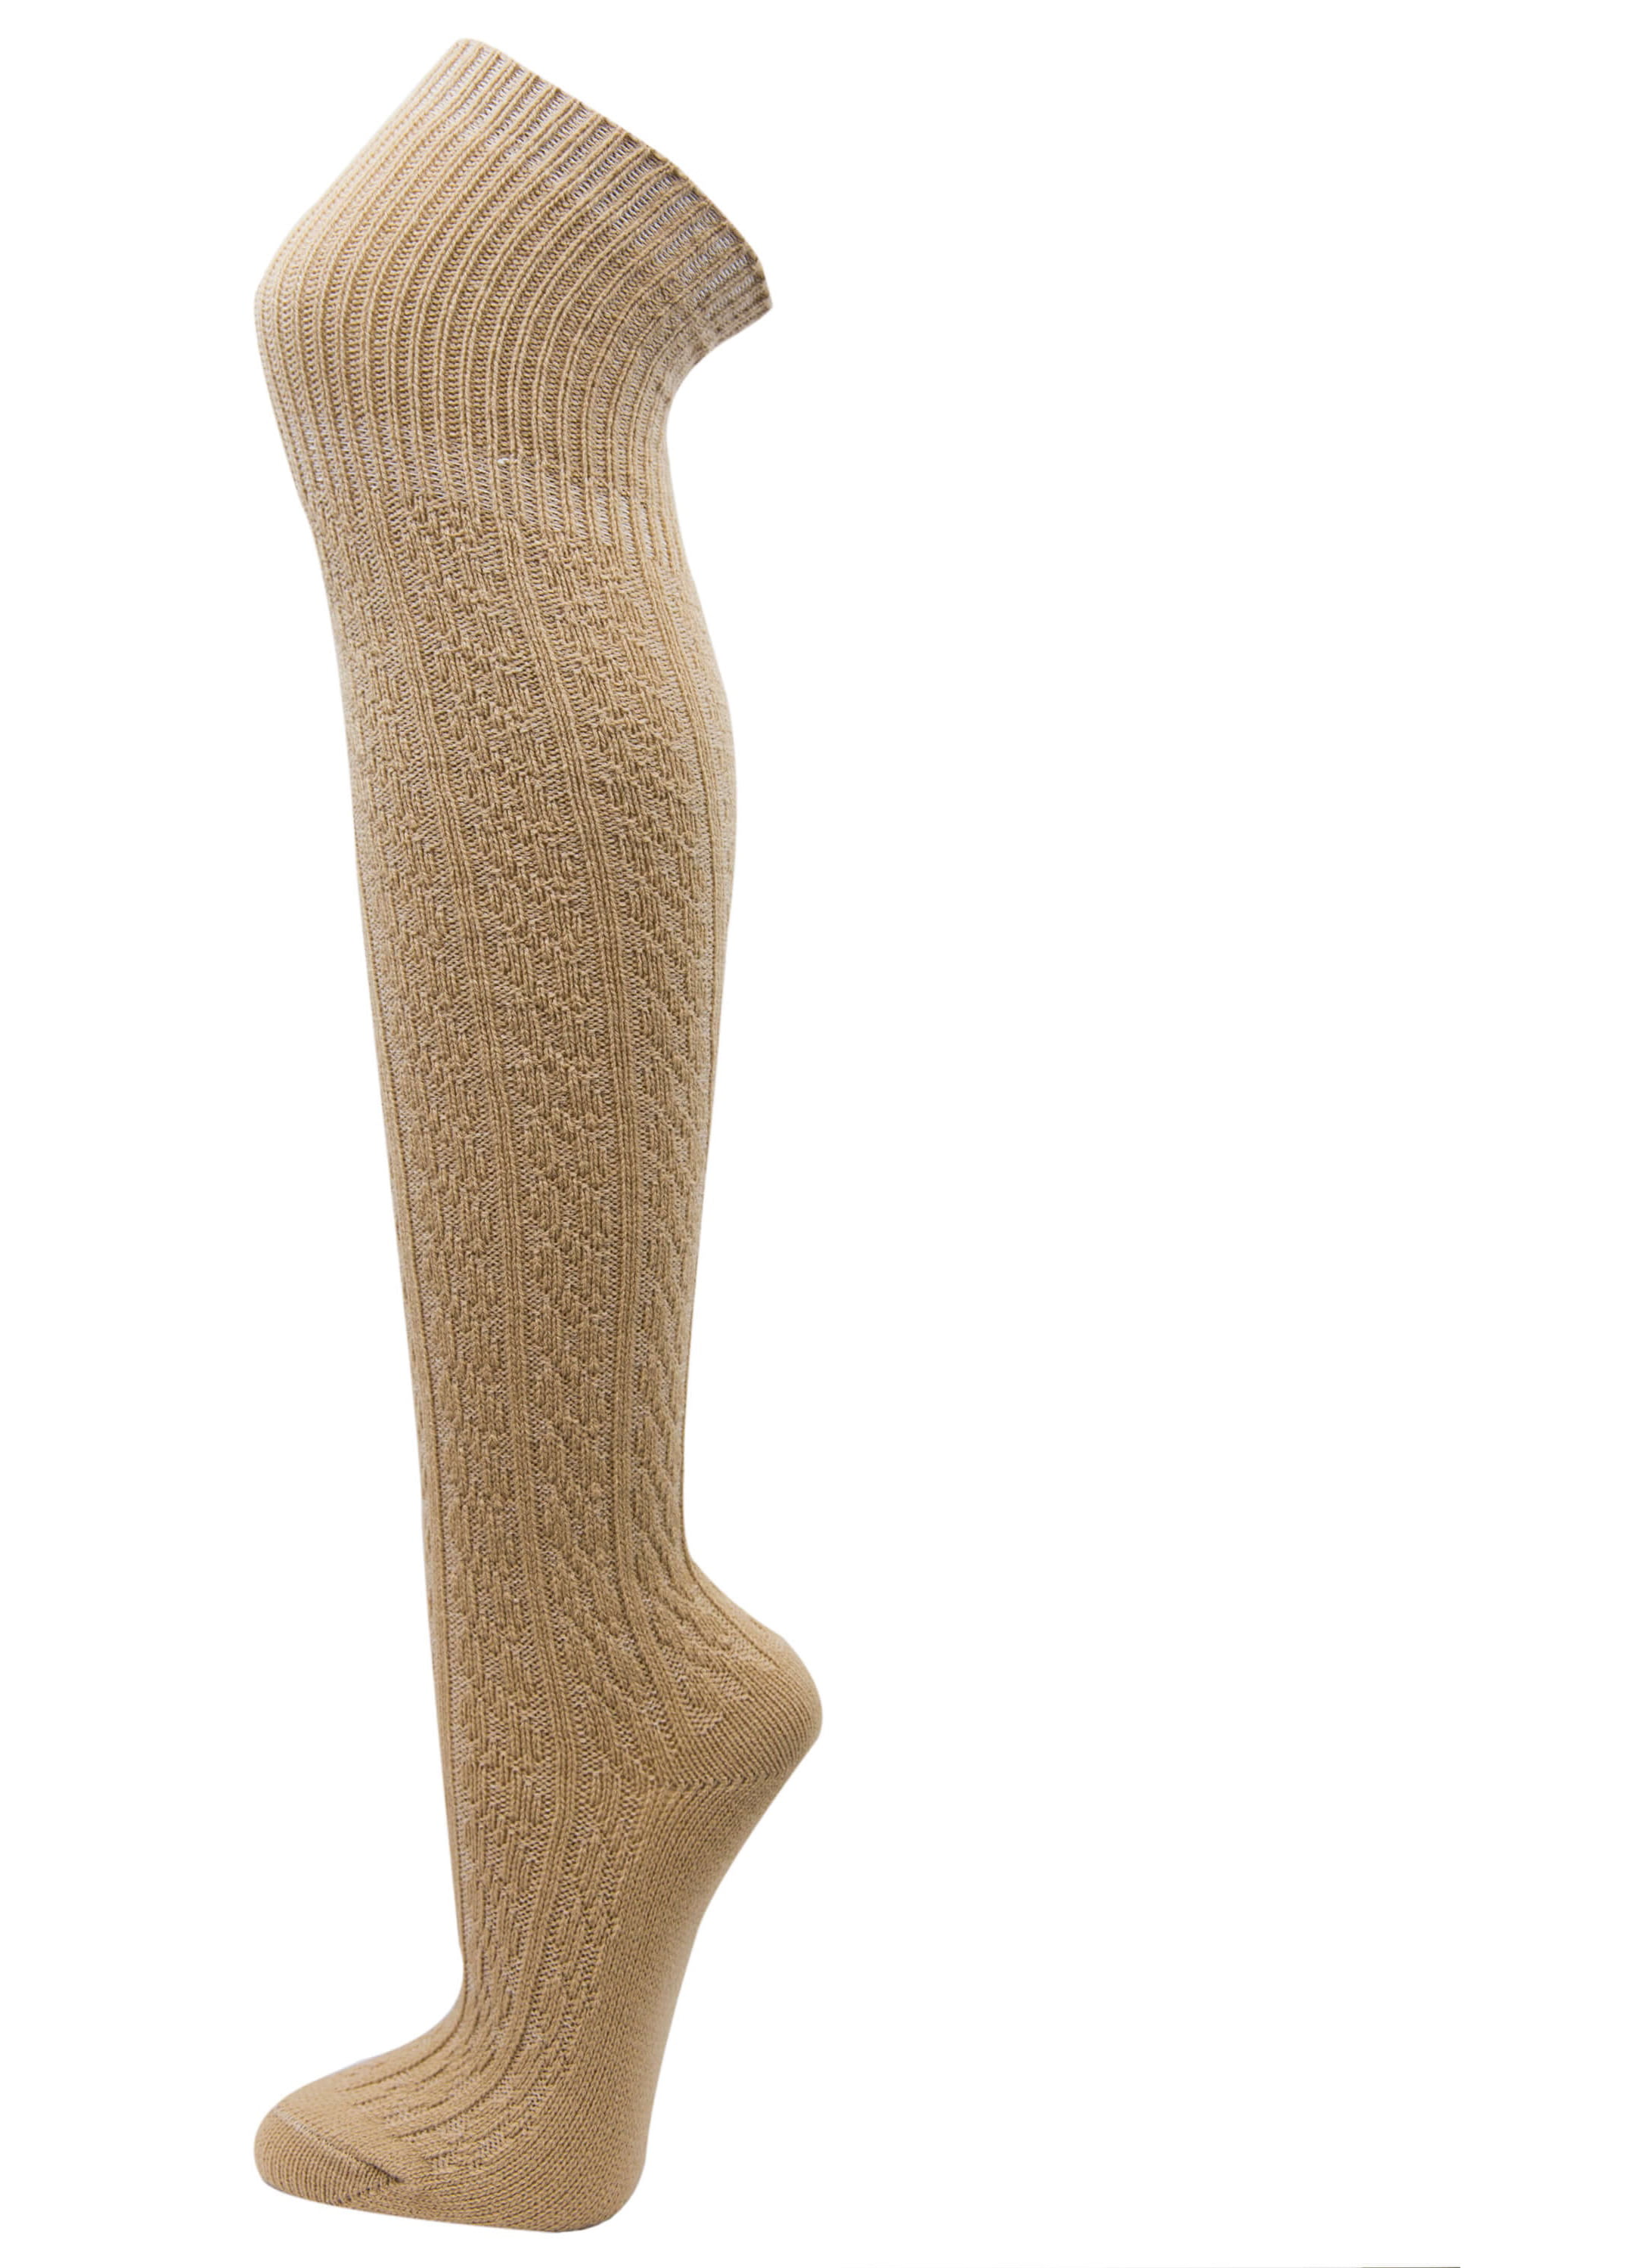 Couver Plain Winter Cable Knitted Boot Over Knee / Thigh High Stocking ...